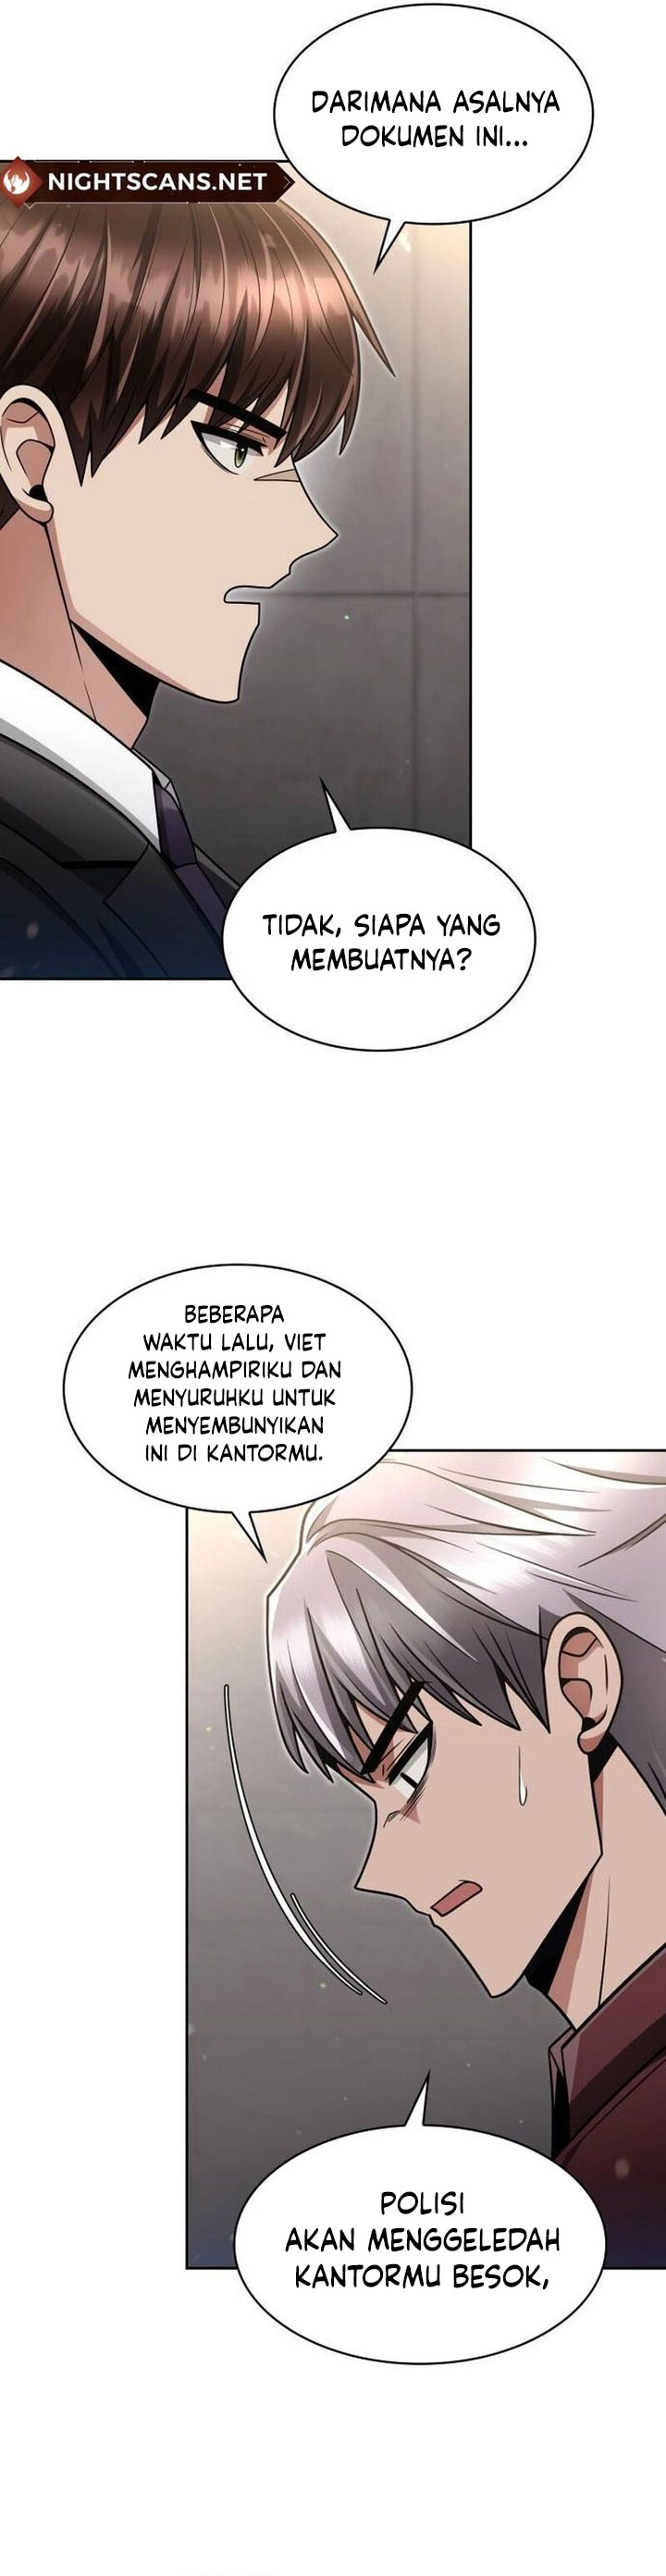 Dilarang COPAS - situs resmi www.mangacanblog.com - Komik clever cleaning life of the returned genius hunter 063 - chapter 63 64 Indonesia clever cleaning life of the returned genius hunter 063 - chapter 63 Terbaru 5|Baca Manga Komik Indonesia|Mangacan